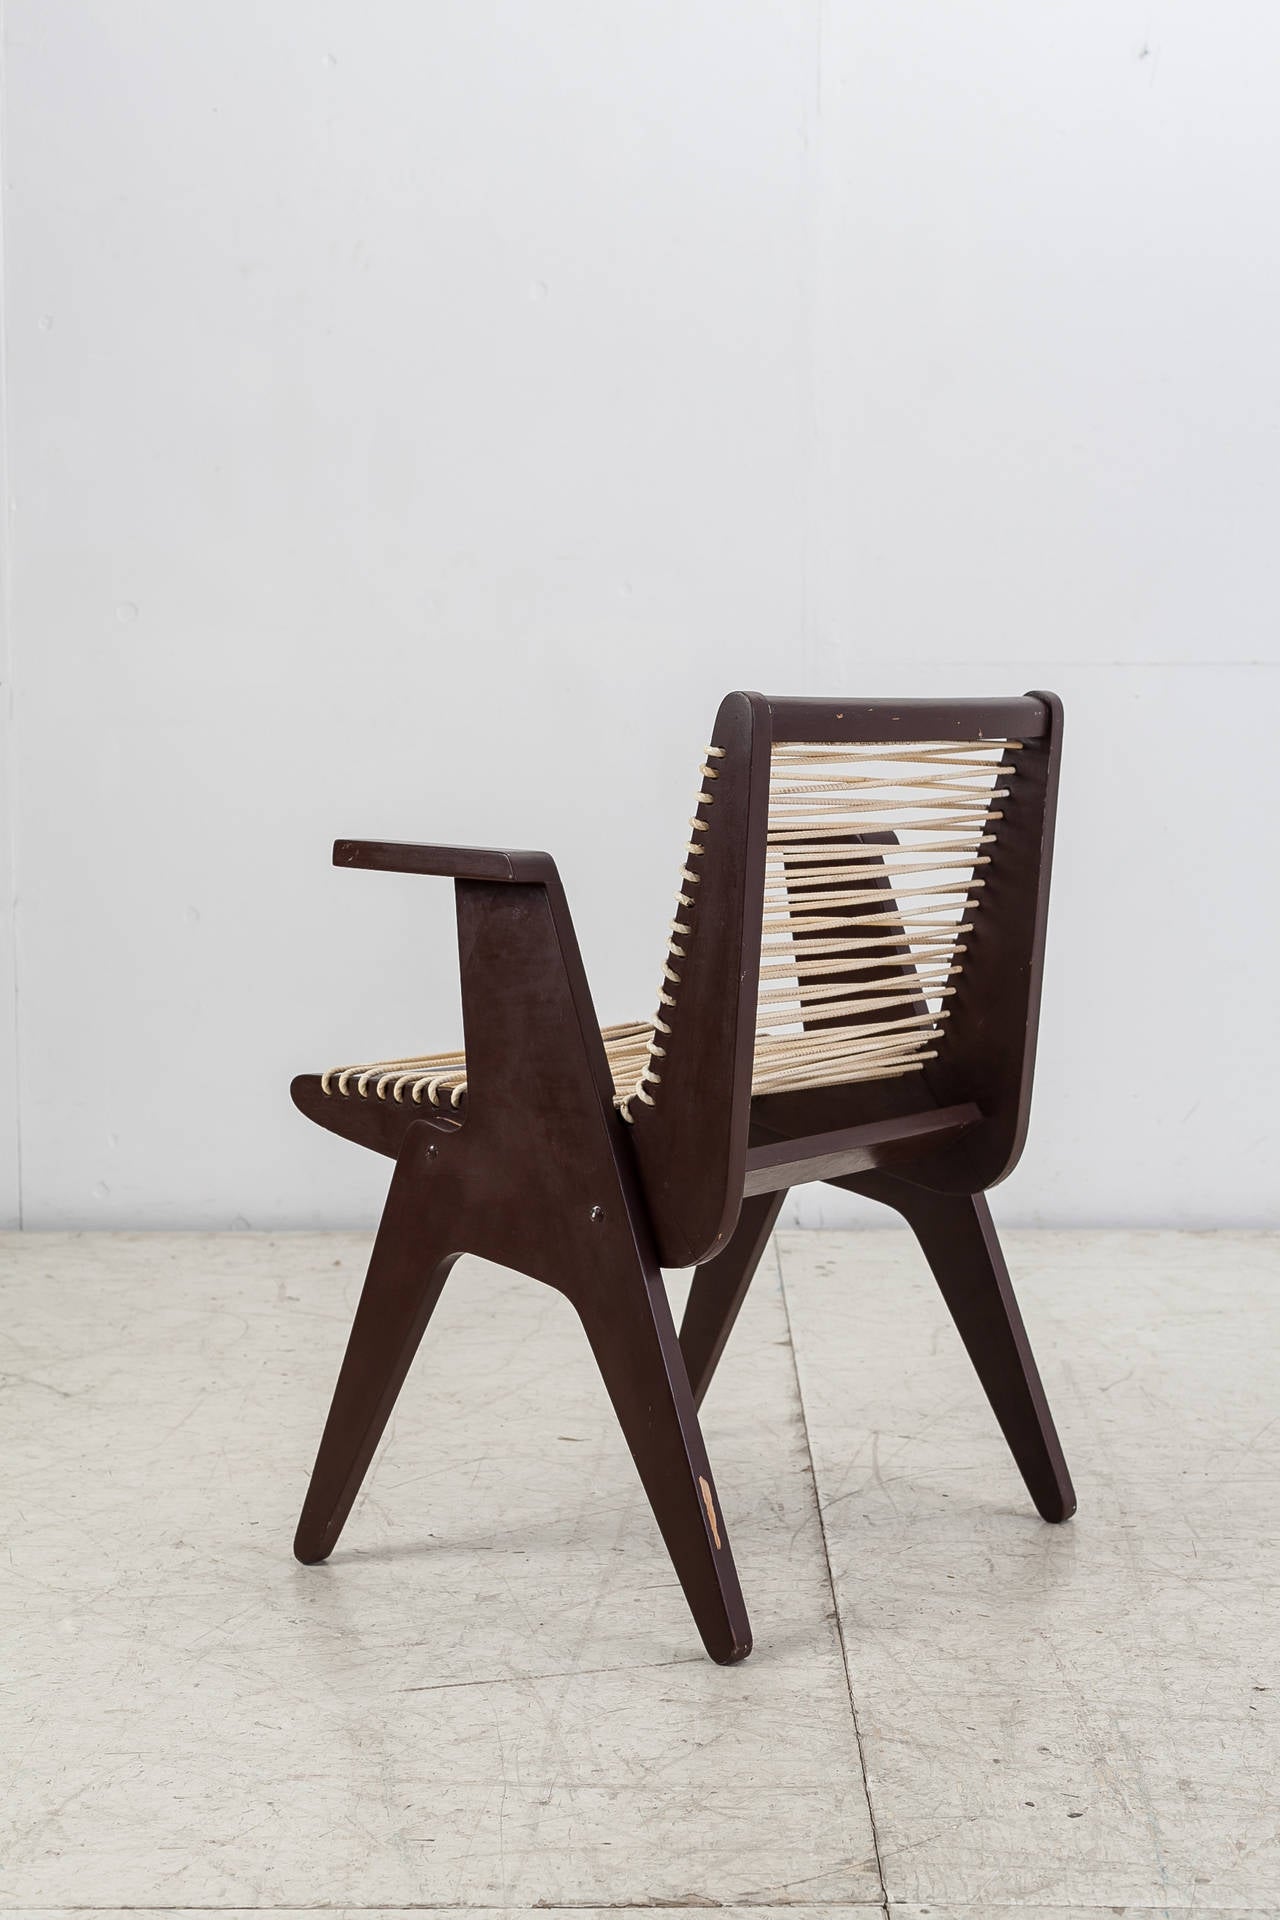 A rare 1940s armchair attributed to Klaus Grabe for Robert Kayton, New York. The brown plywood frame has a white plastified cord woven into it.

Bauhaus trained Klaus Grabe left Germany in the 1930s for Mexico. Here Grabe worked together with